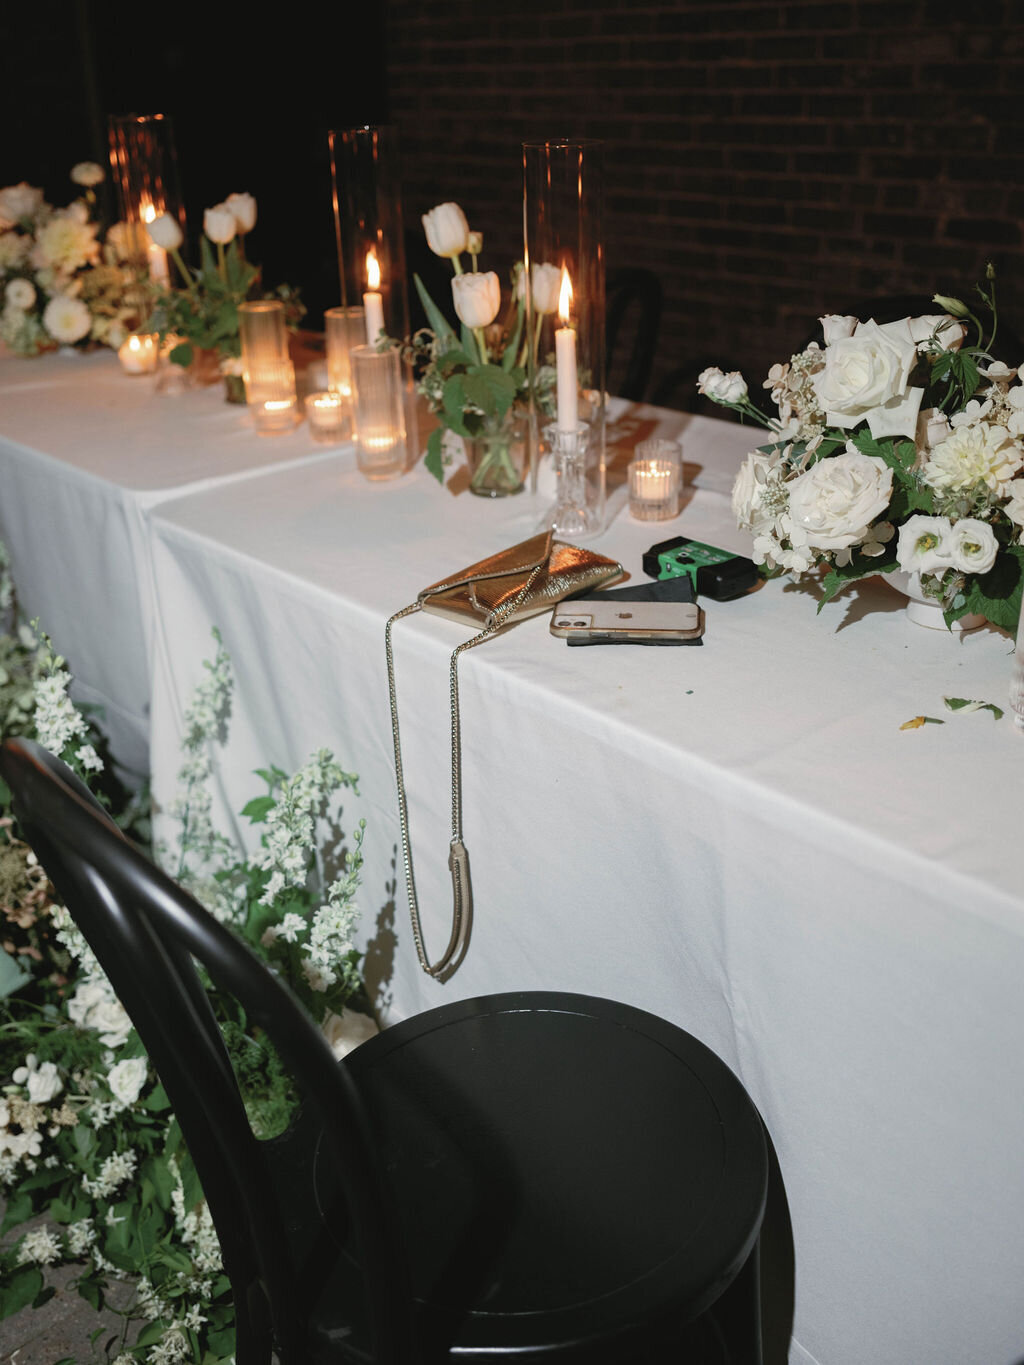 Head table with compote arrangements and pillar candles down the length of the table.